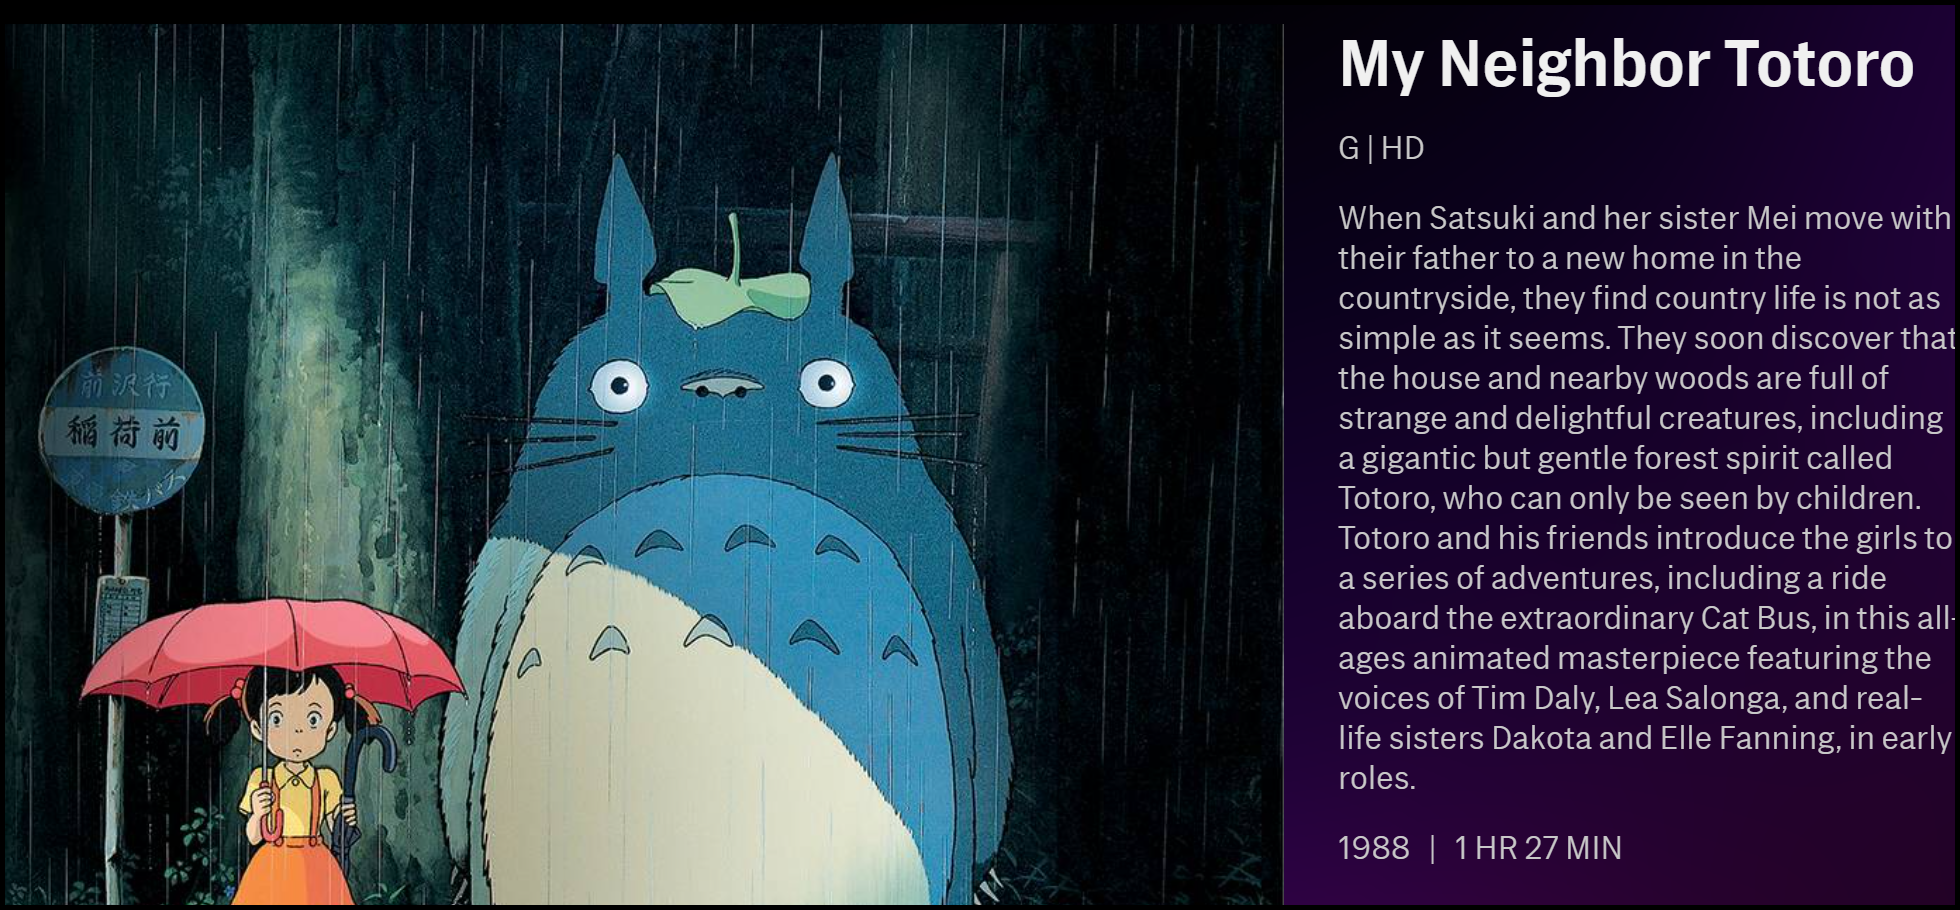 The description of My Neighbor Totoro on HBO Max.